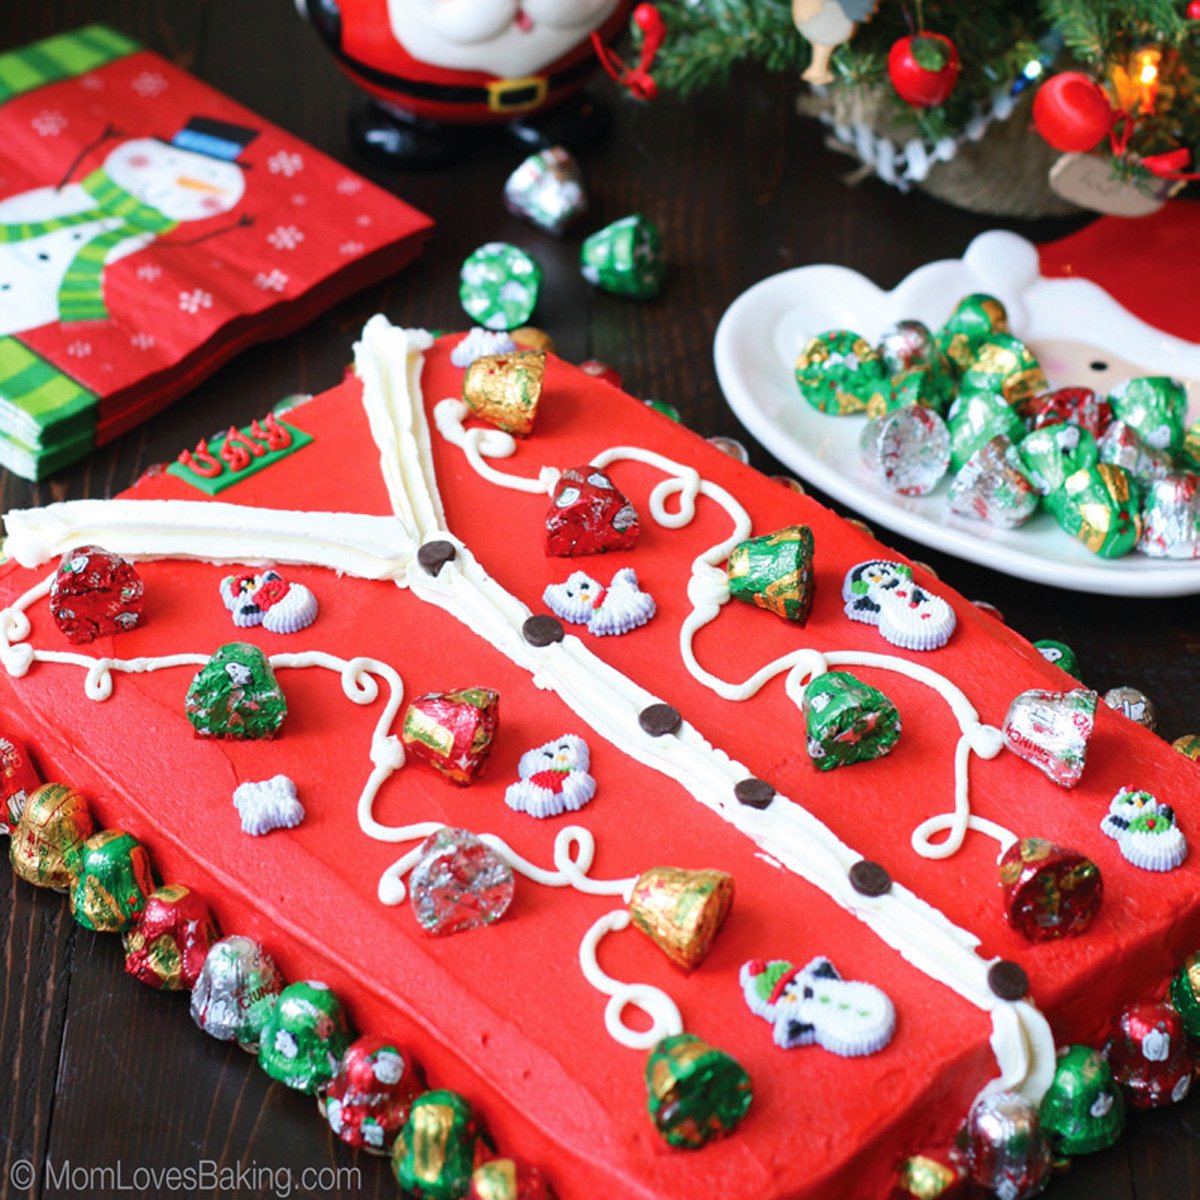 https://www.momlovesbaking.com/wp-content/uploads/2015/12/Ugly-Sweater-Cake-Party.jpg